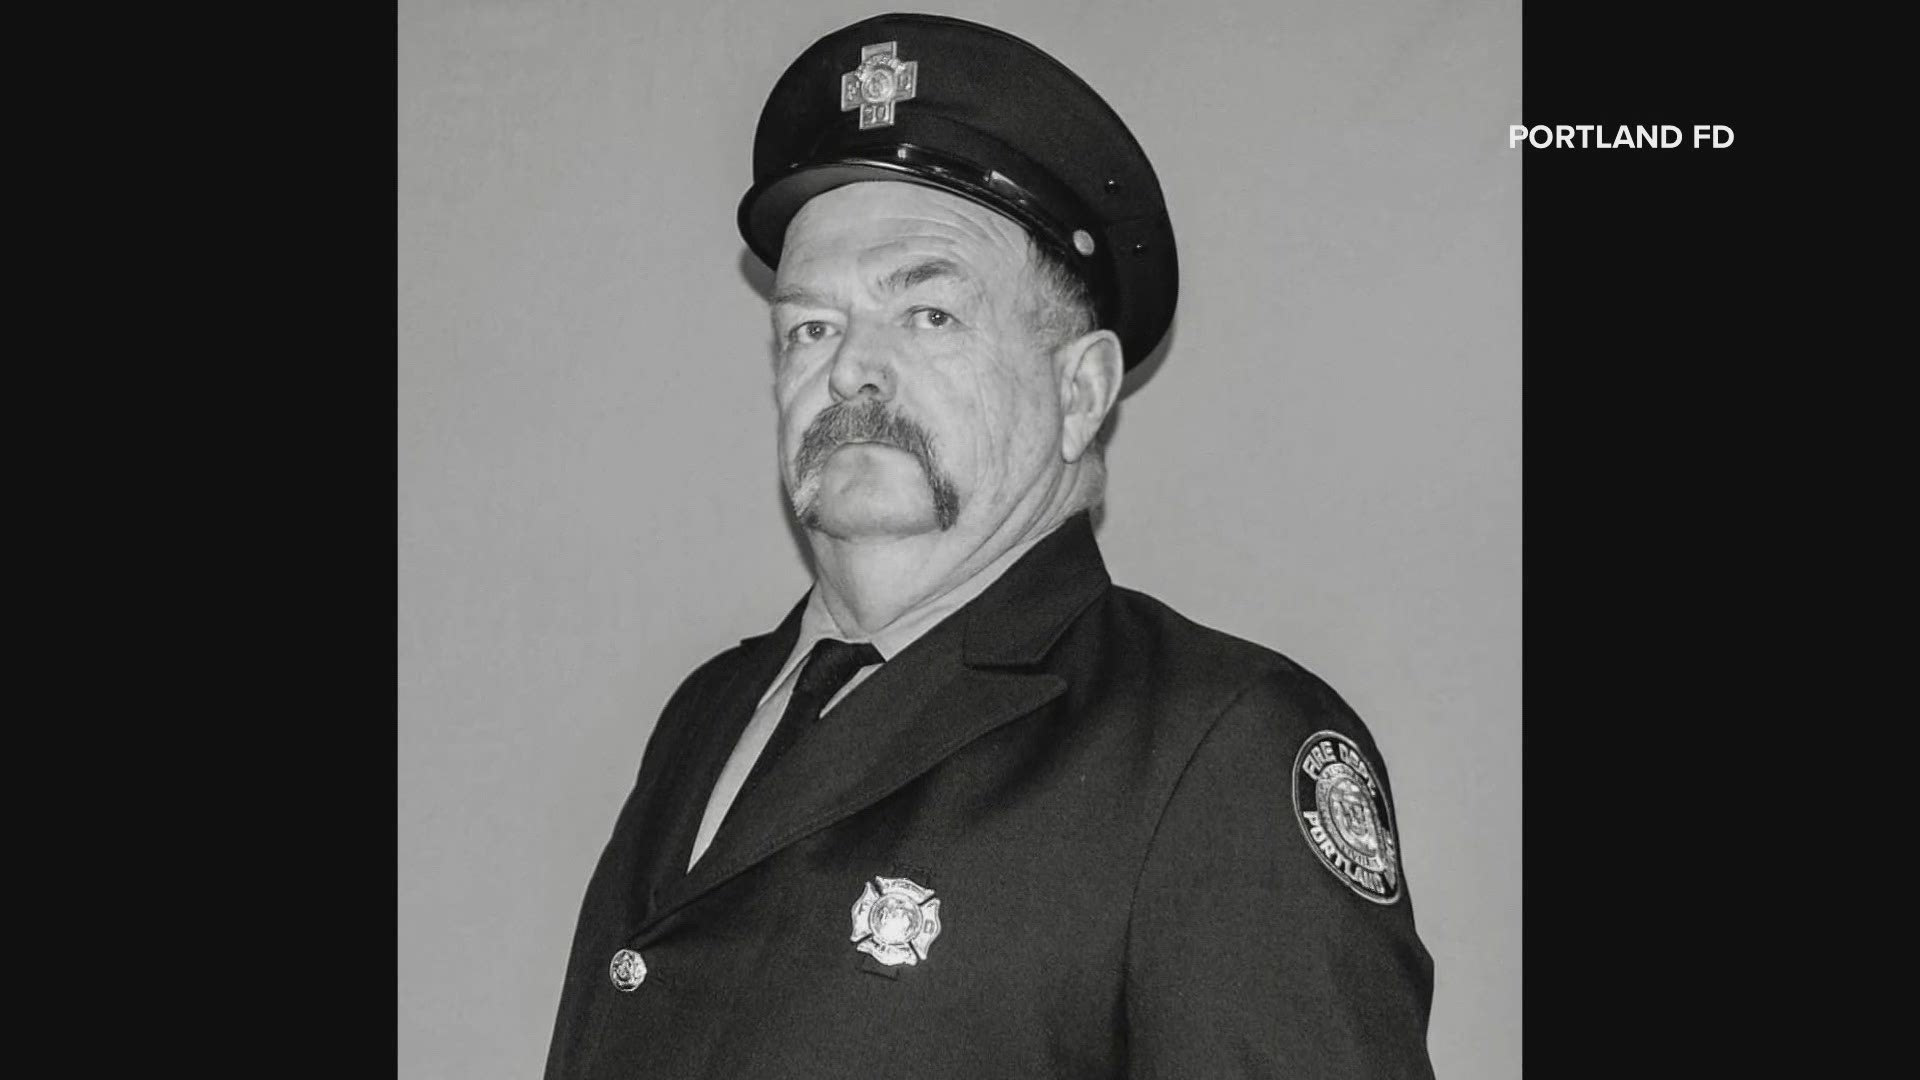 The veteran most firefighter at the department died off duty on Saturday.